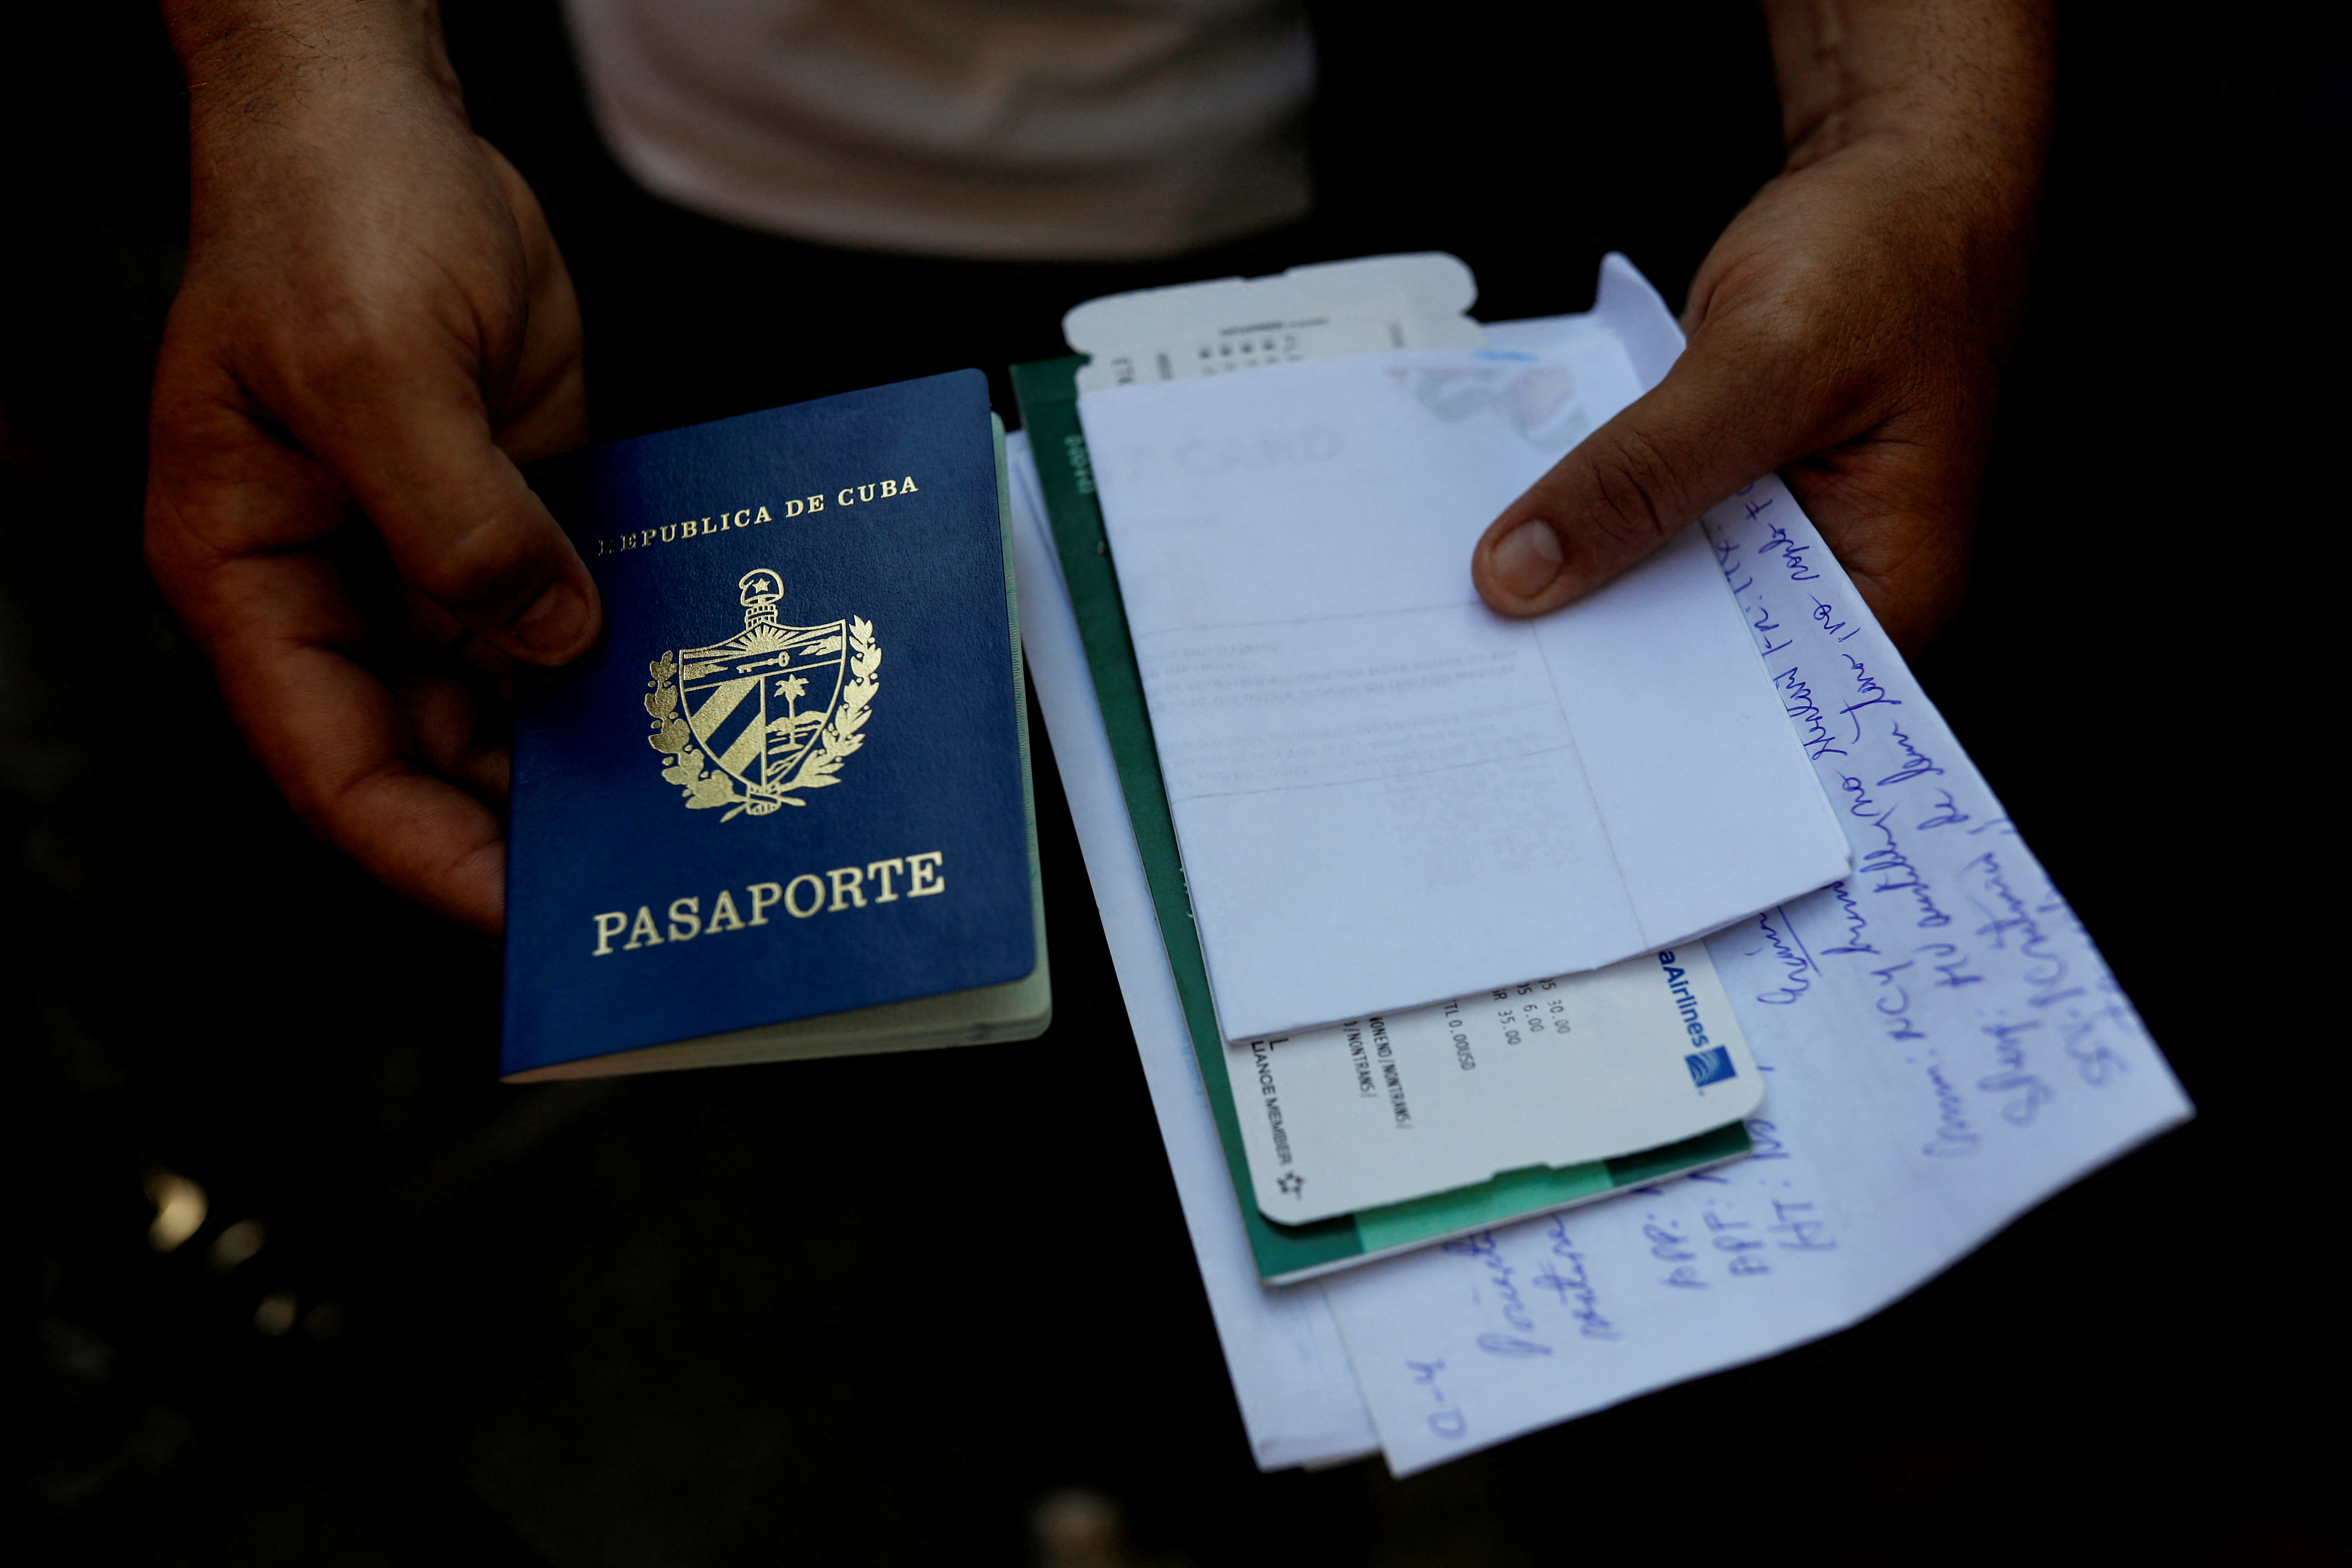 After five years, the US Embassy in Cuba will resume the processing of migrant visas in May